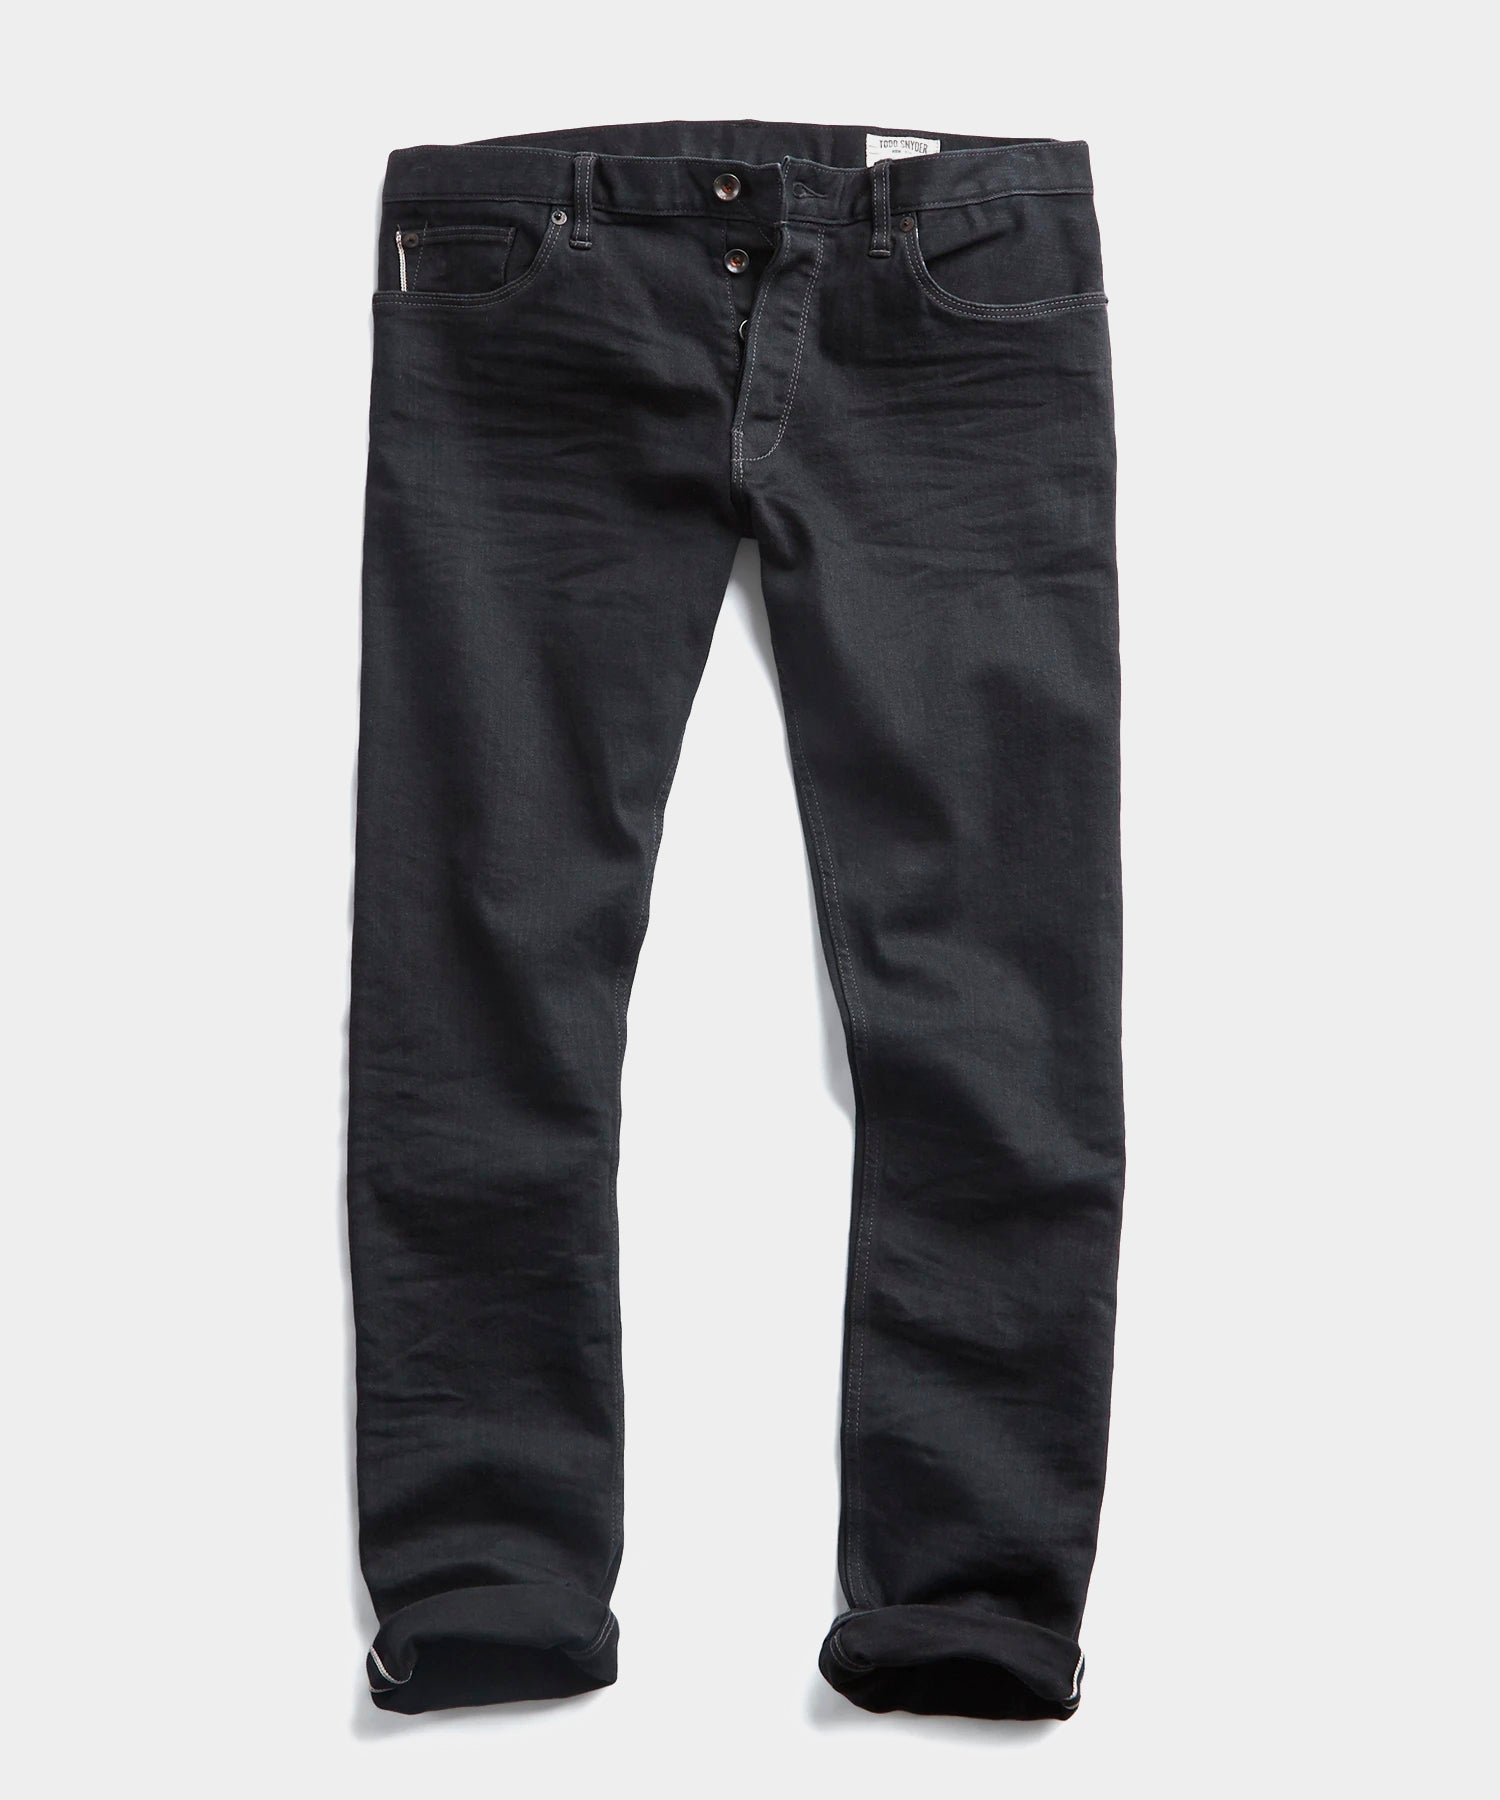 Image of Slim Fit Japanese Stretch Selvedge Jean in Black Rinse